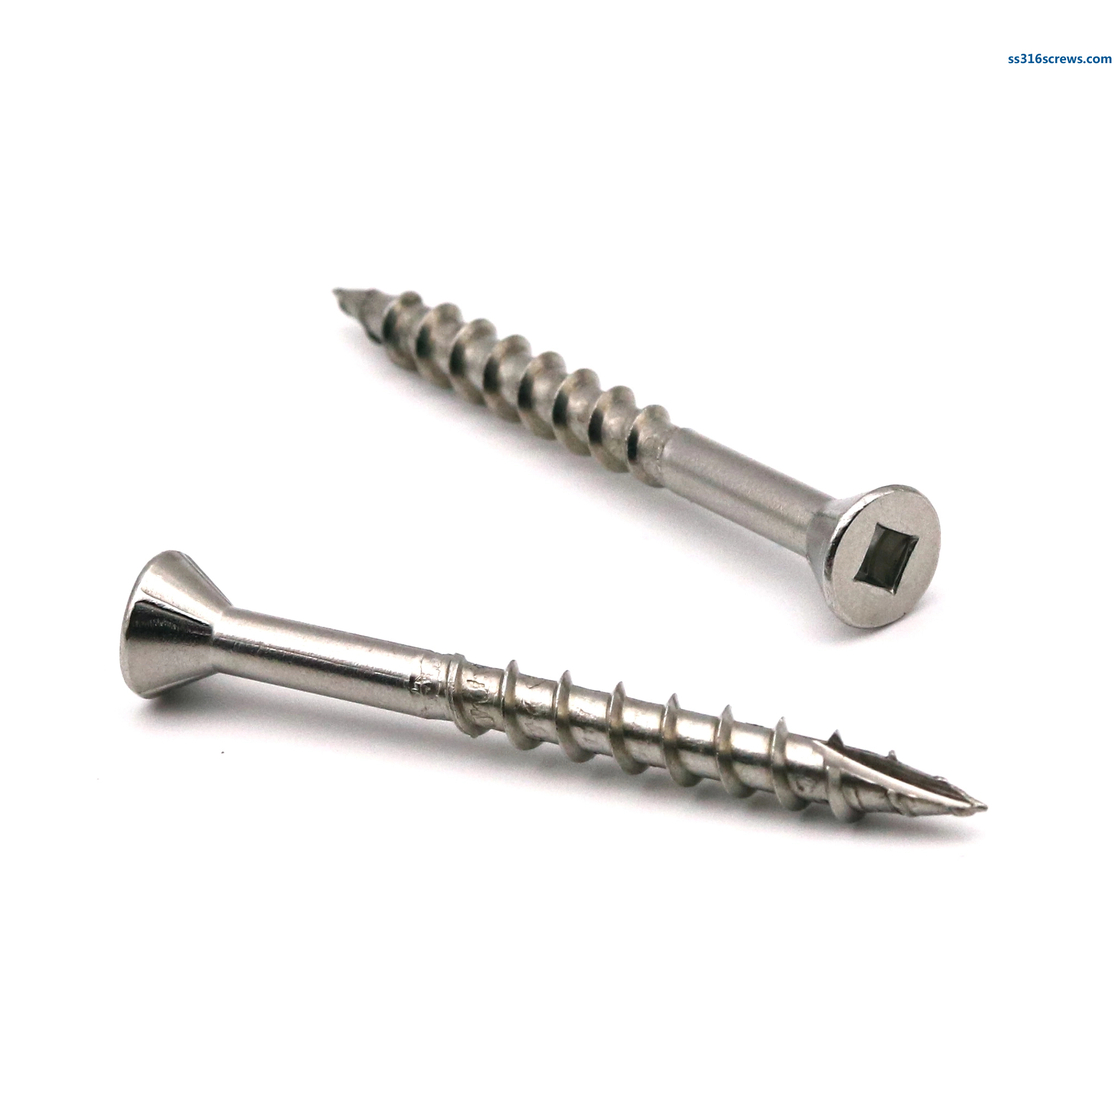 10G 304 Stainless Steel Square Drive Type 17 Deck Screw